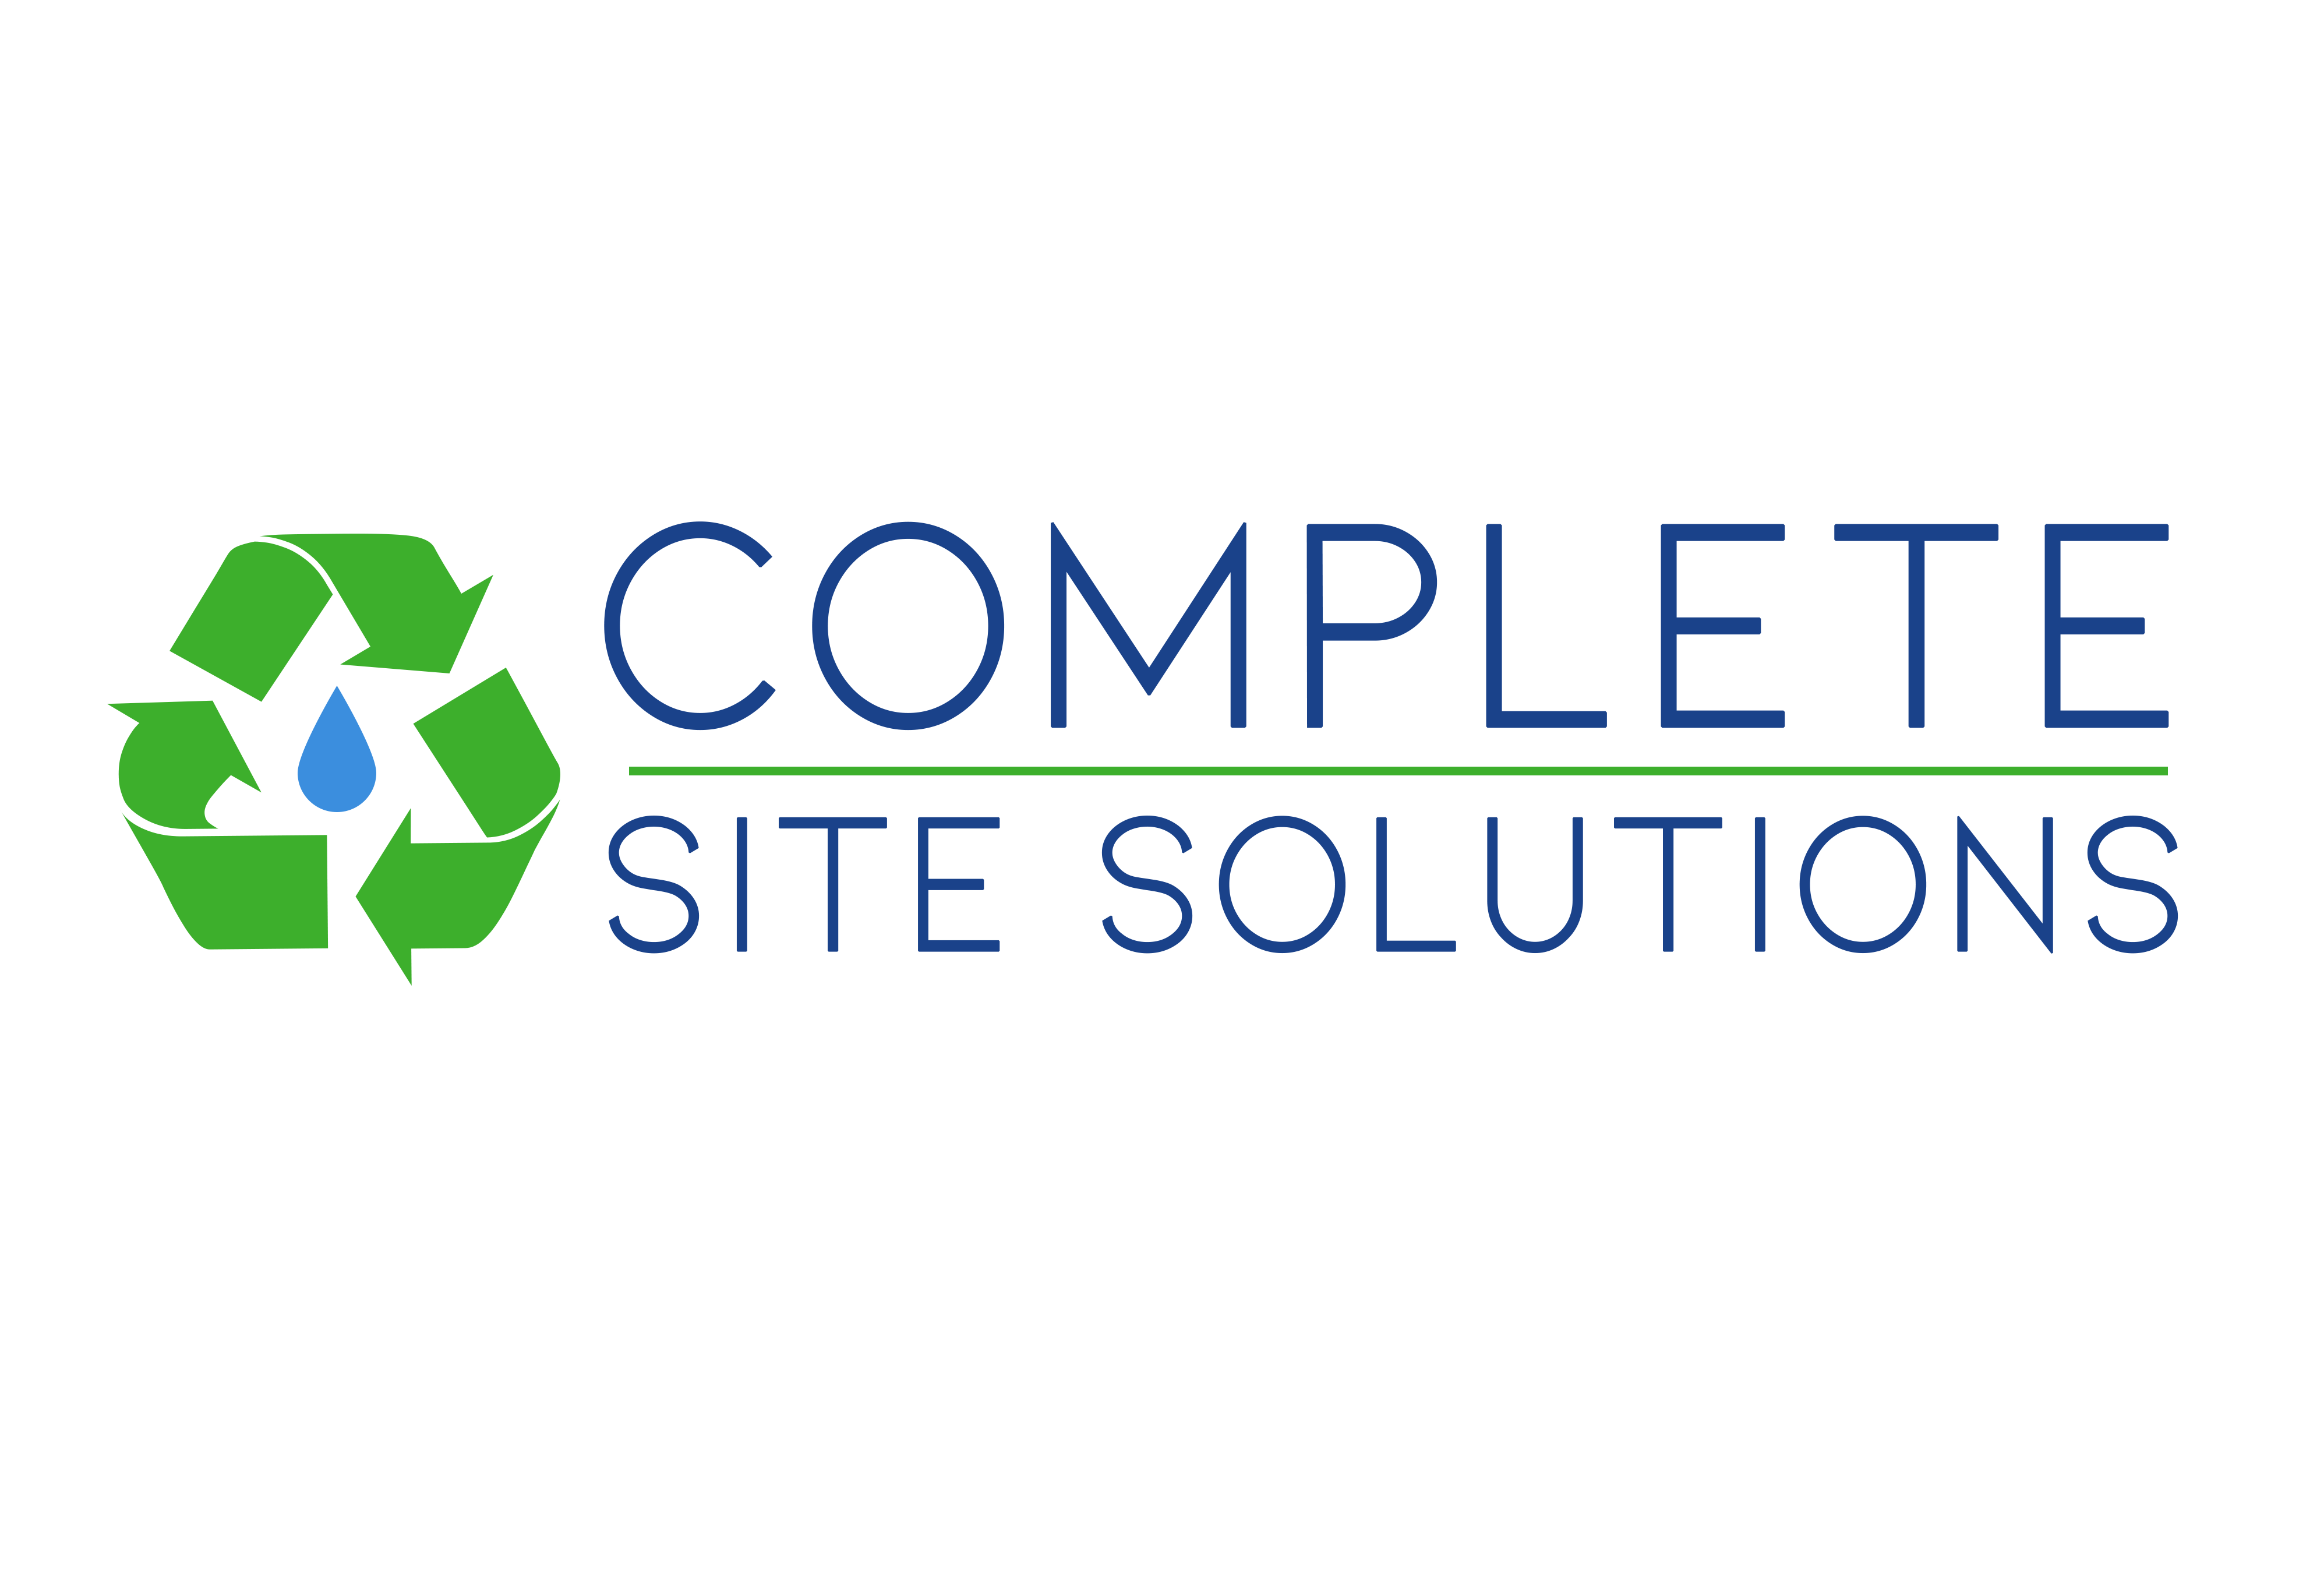 Complete Site Solutions